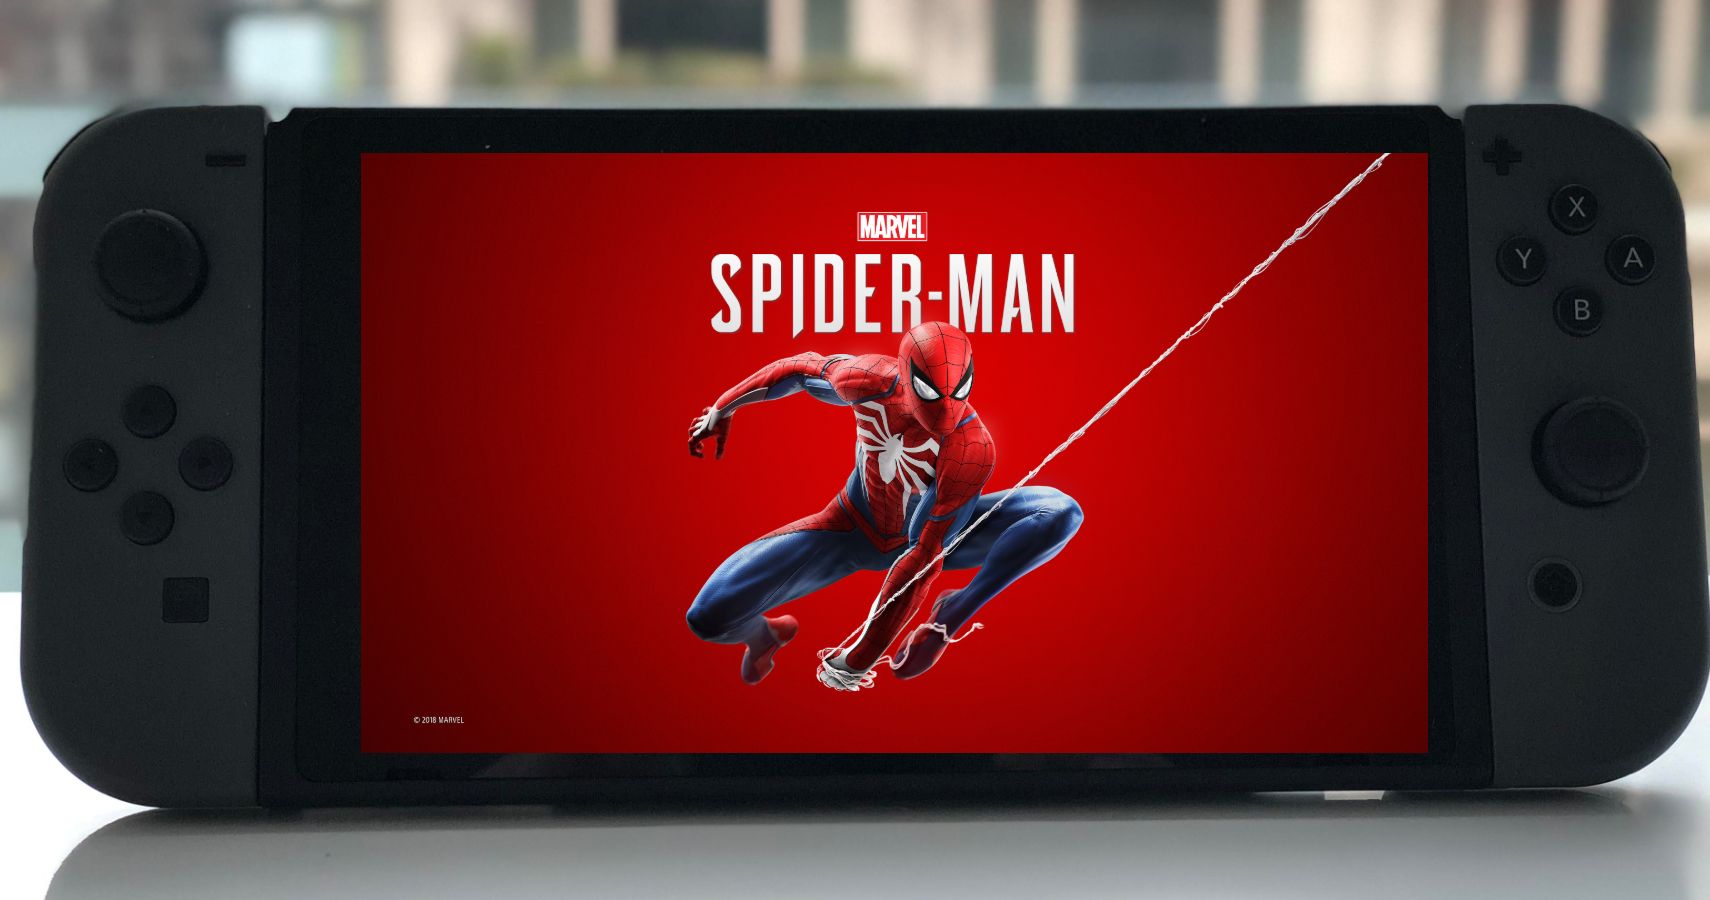 If Sony And Marvel Are Back Together The Next SpiderMan Game Should Be Multiplatform